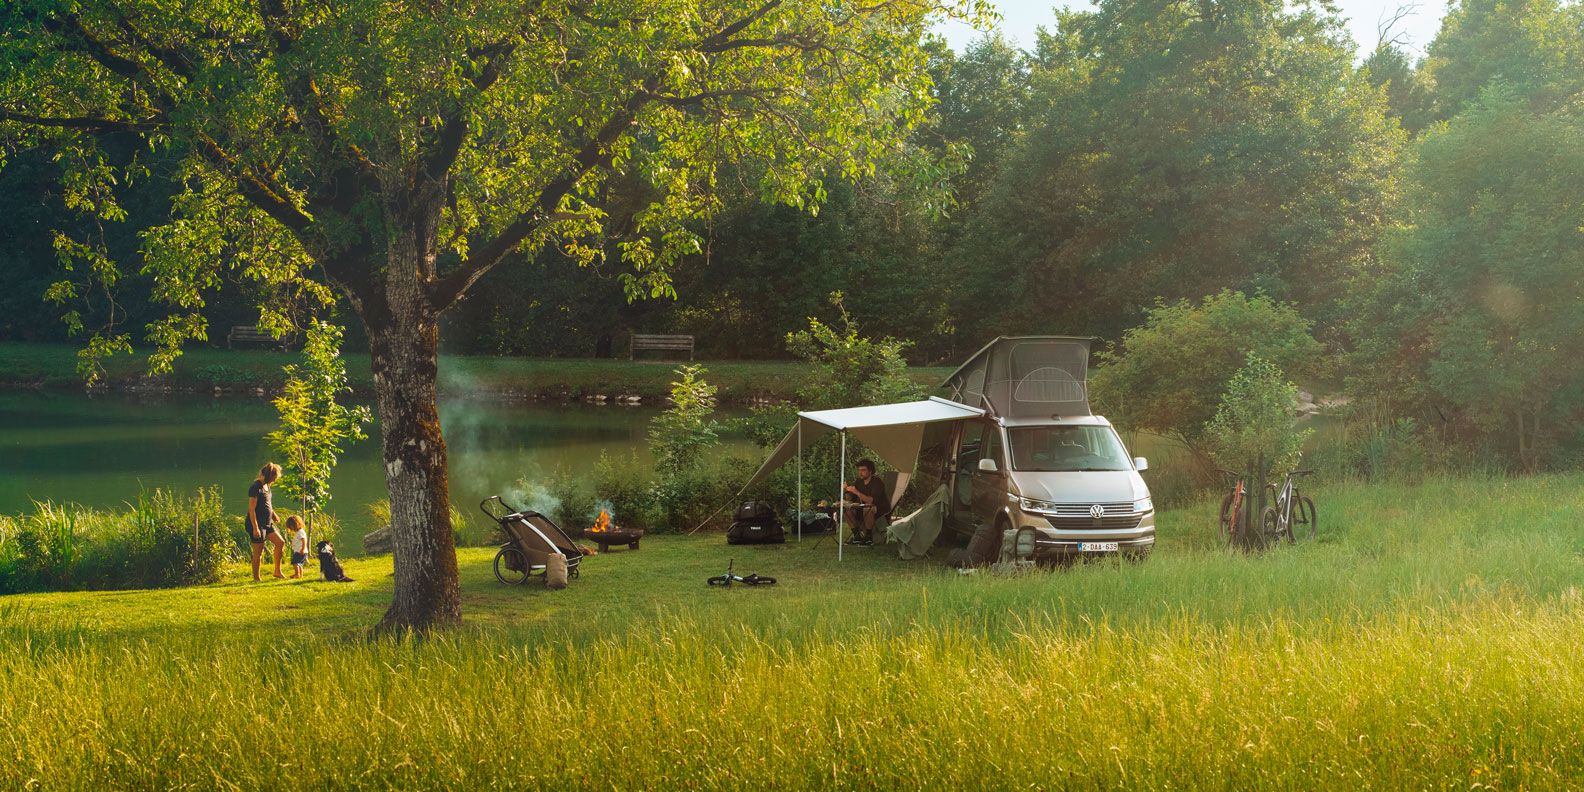 A vehicle is parked in a field next to a lake with the Thule Subsola awning panels.